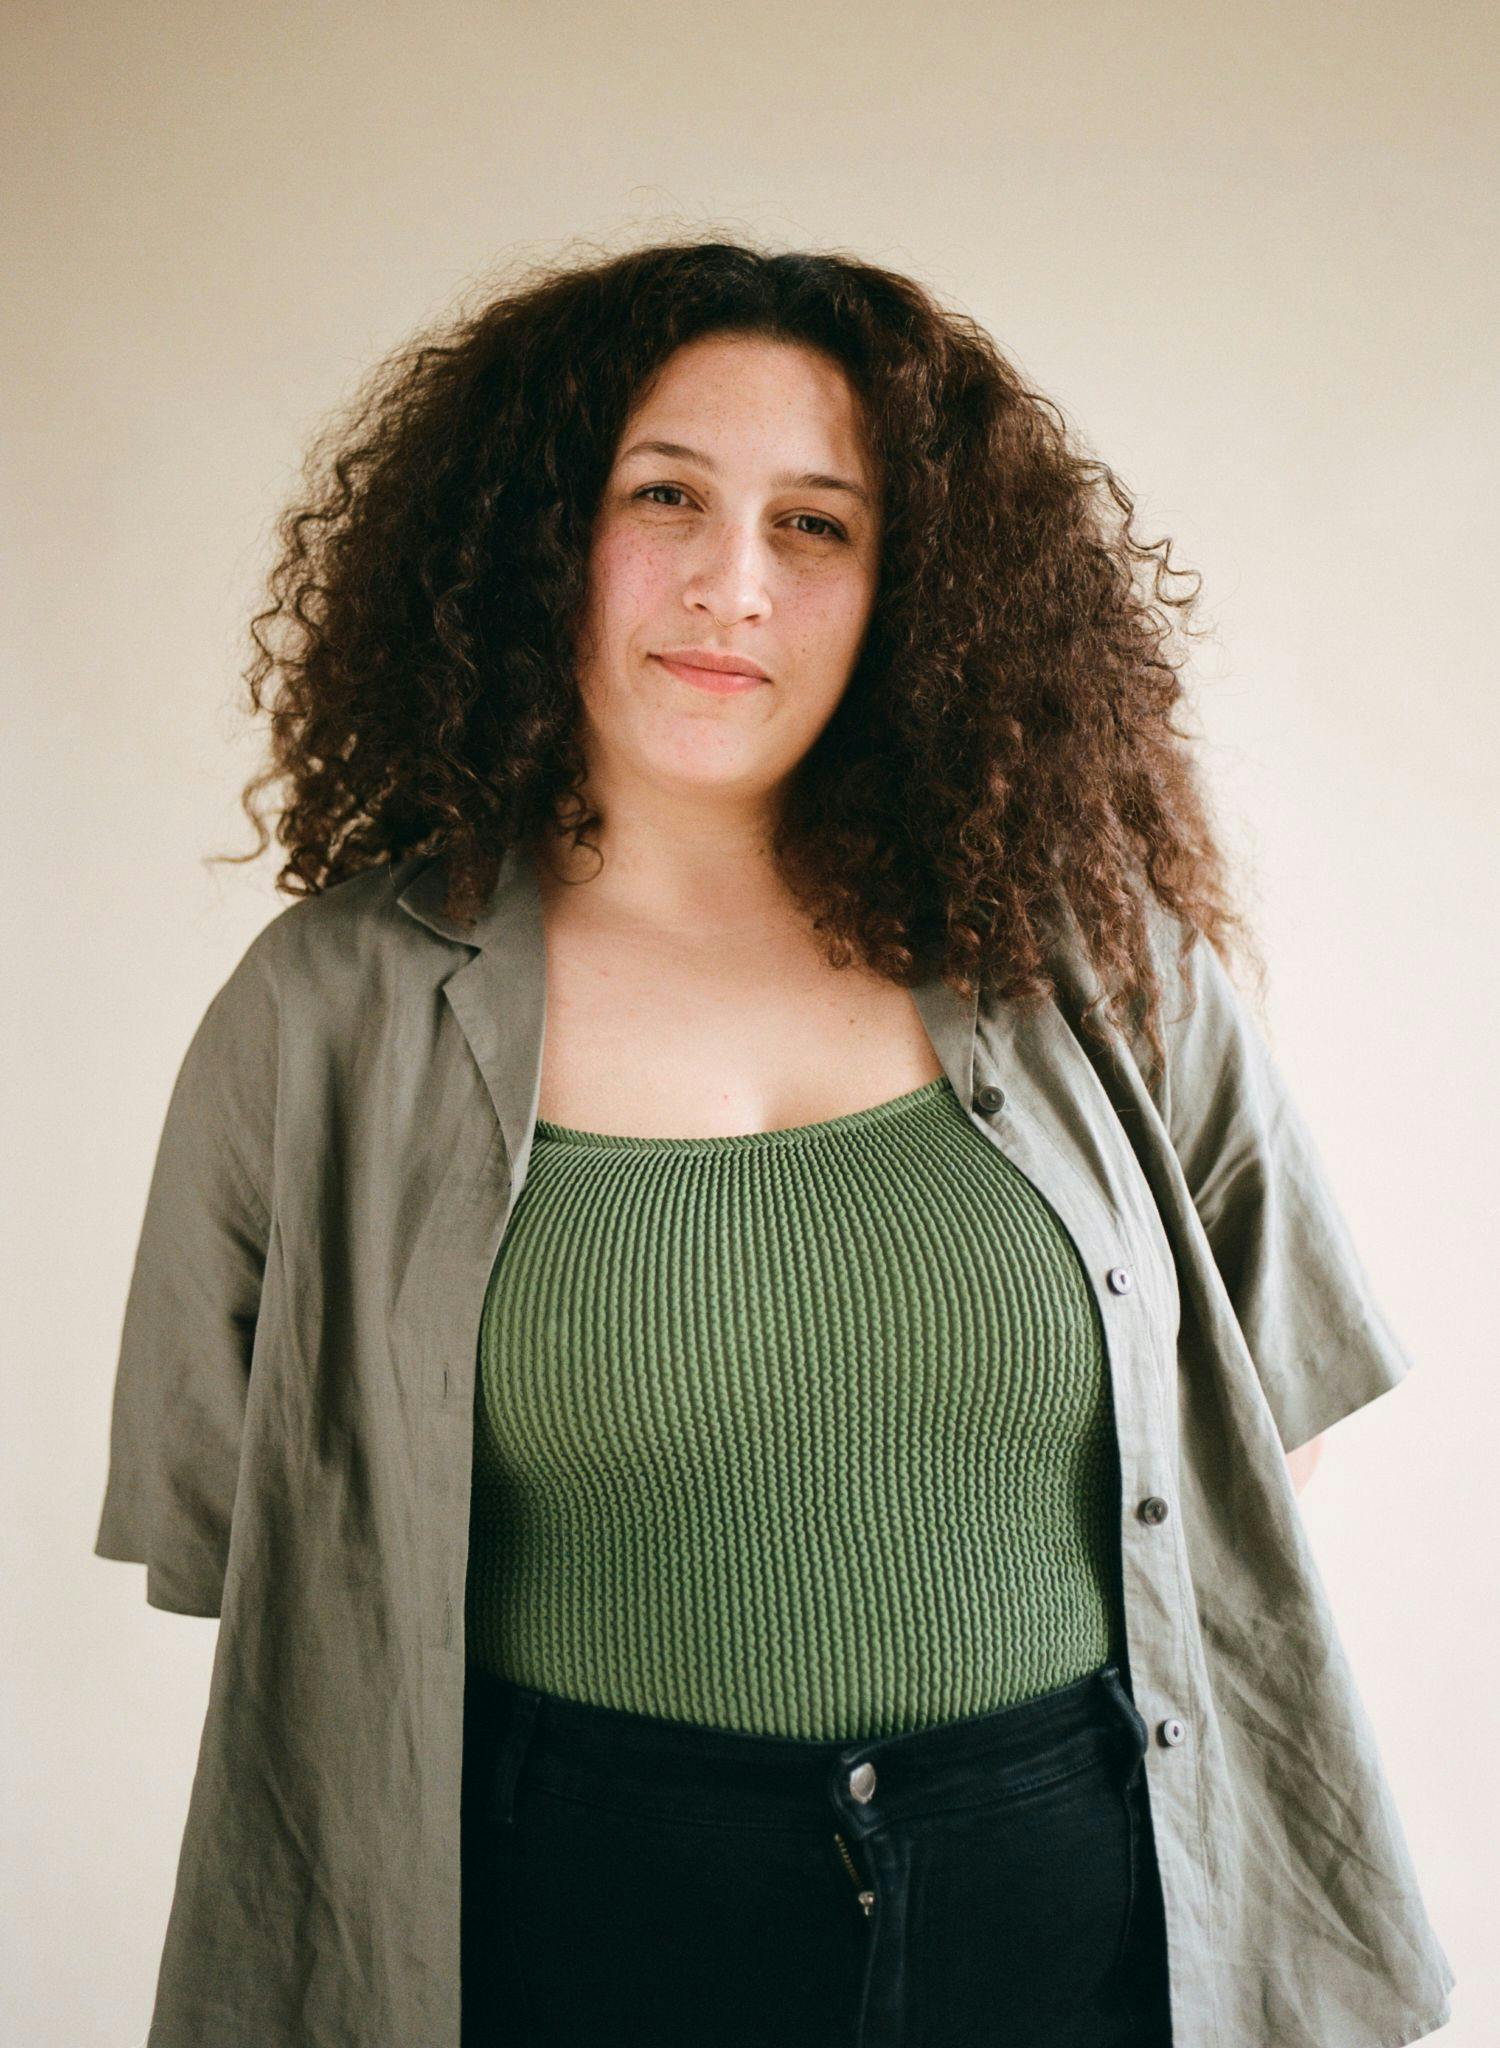 Portrait of Nanci standing in green shirt and swimsuit with black pants.